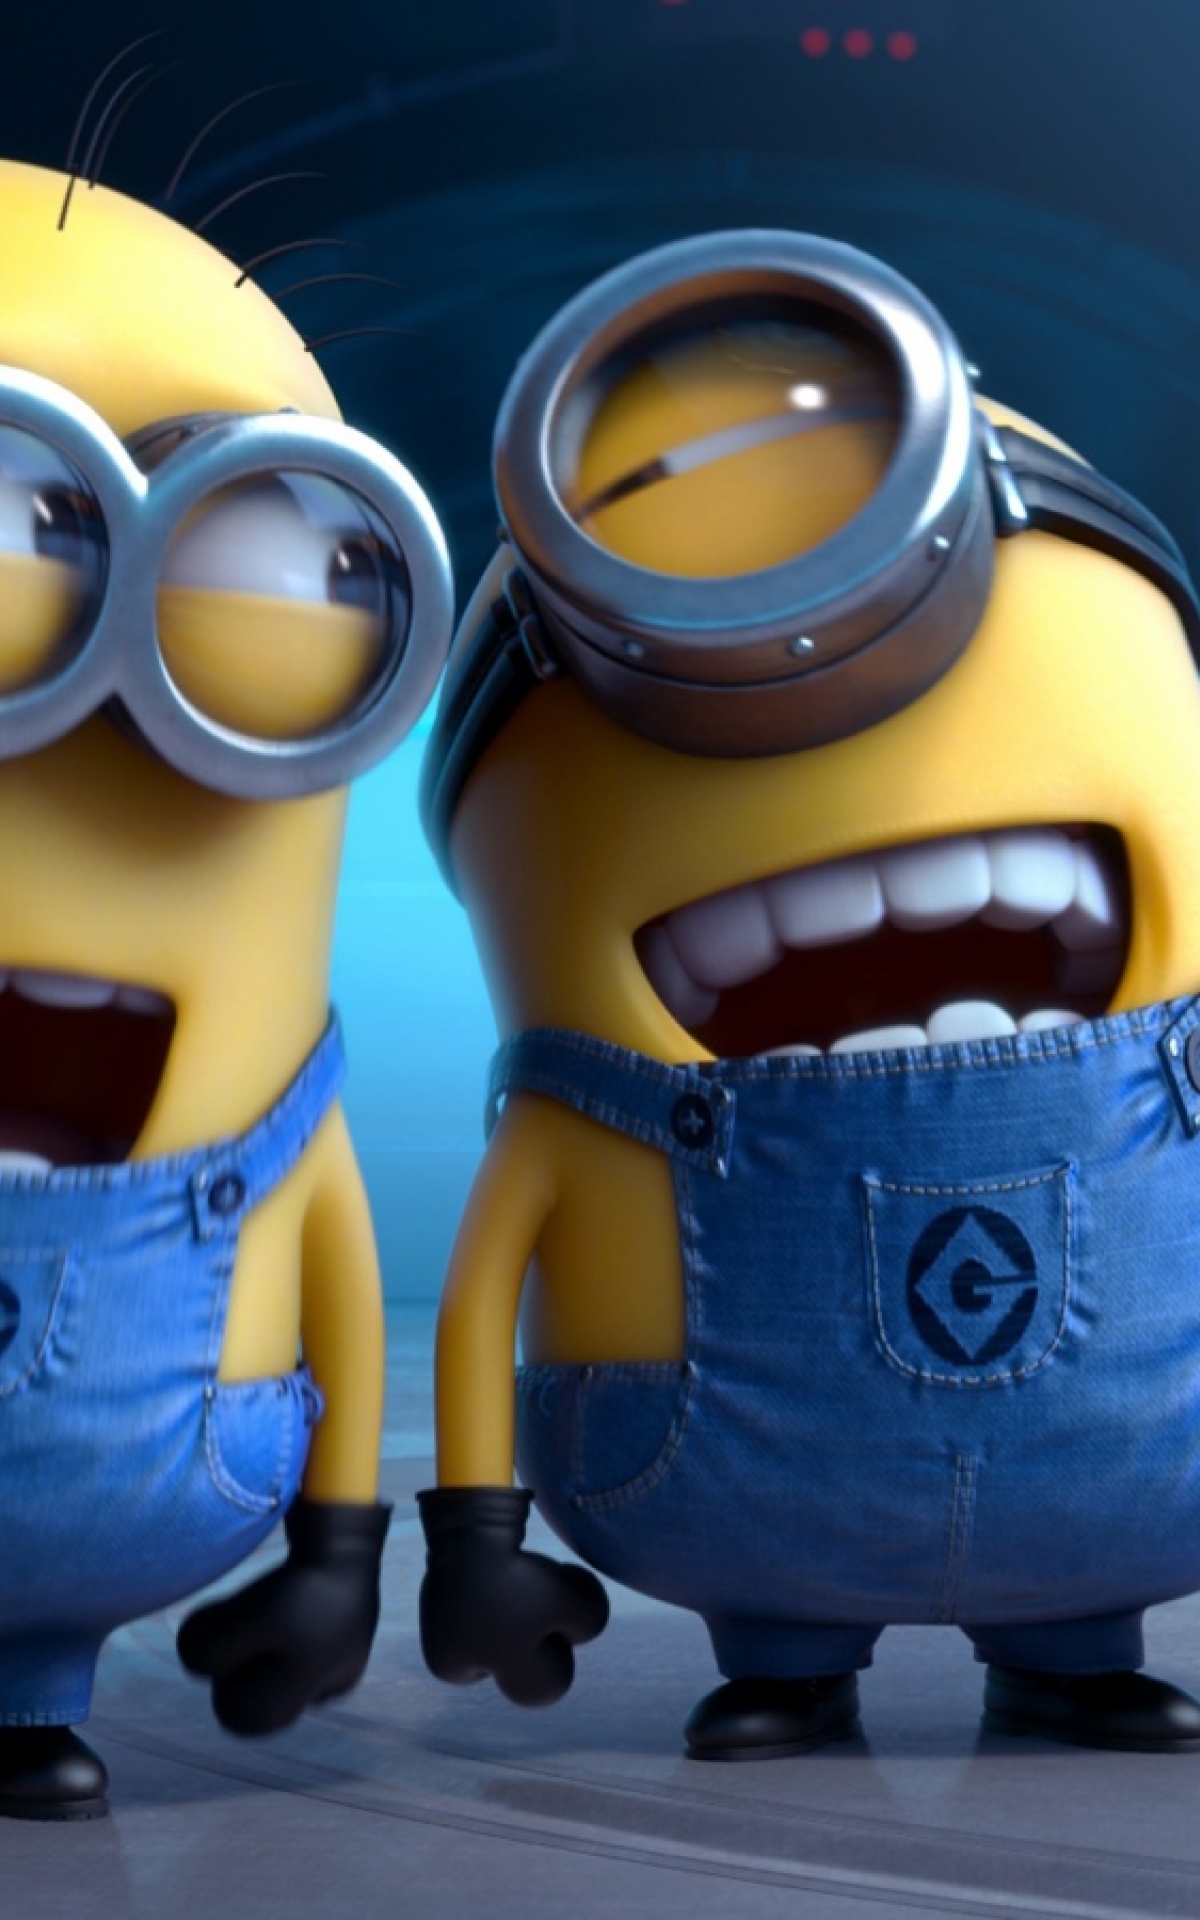 10x19 Minion Laugh Wallpaper Hd 10x19 Resolution Wallpaper Hd Movies 4k Wallpapers Images Photos And Background Wallpapers Den